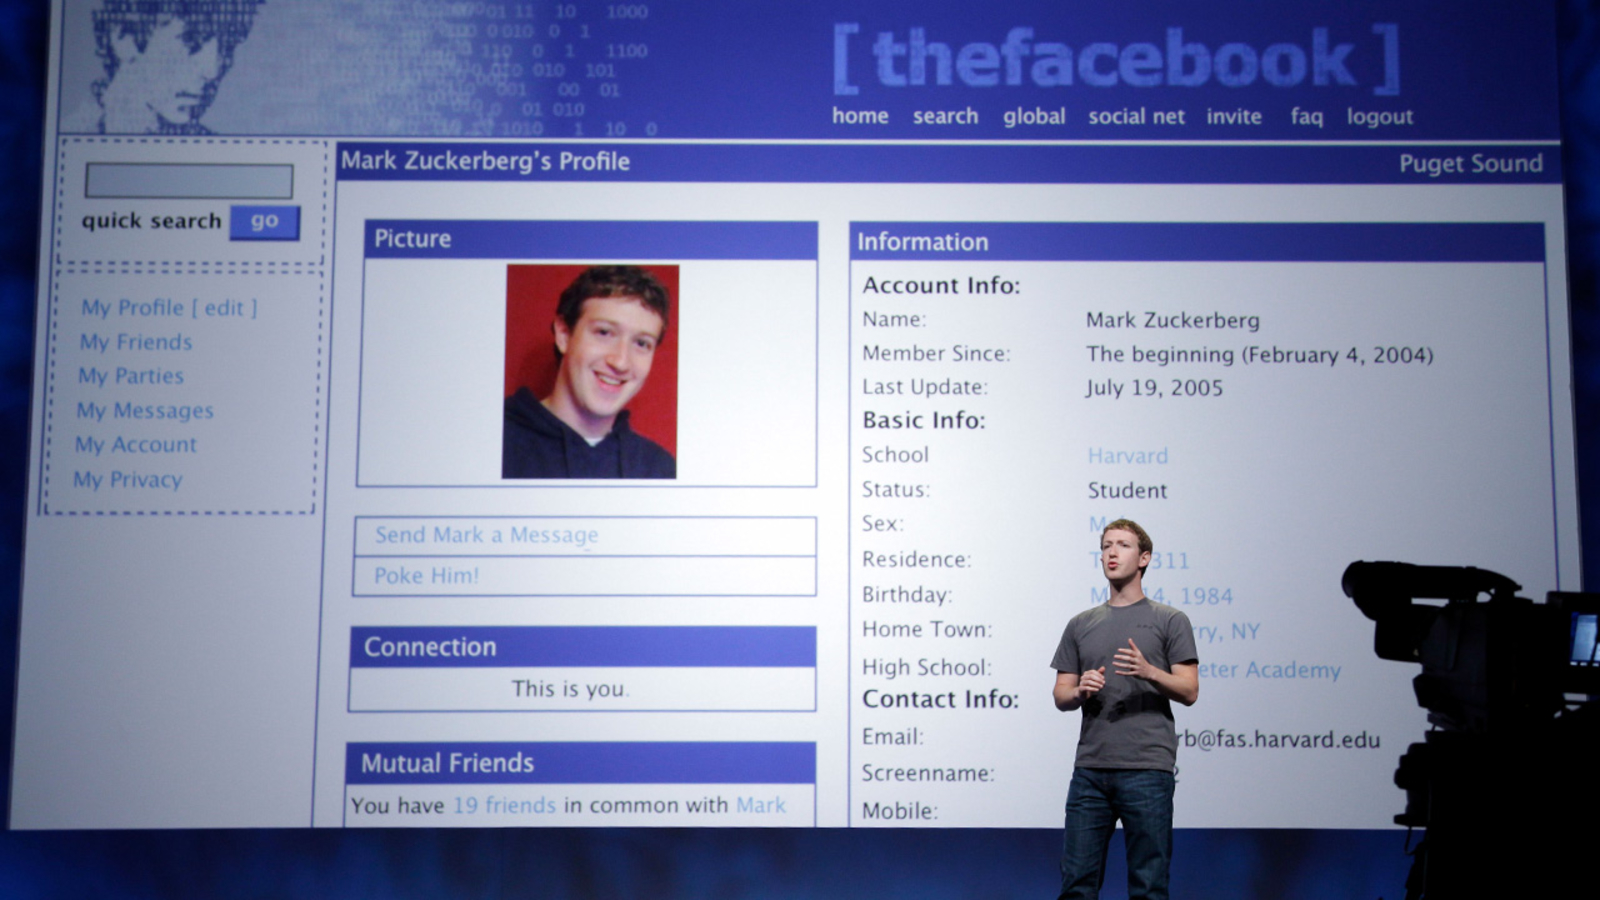 Mark Zuckerberg talking about Facebook 20 years after it started.